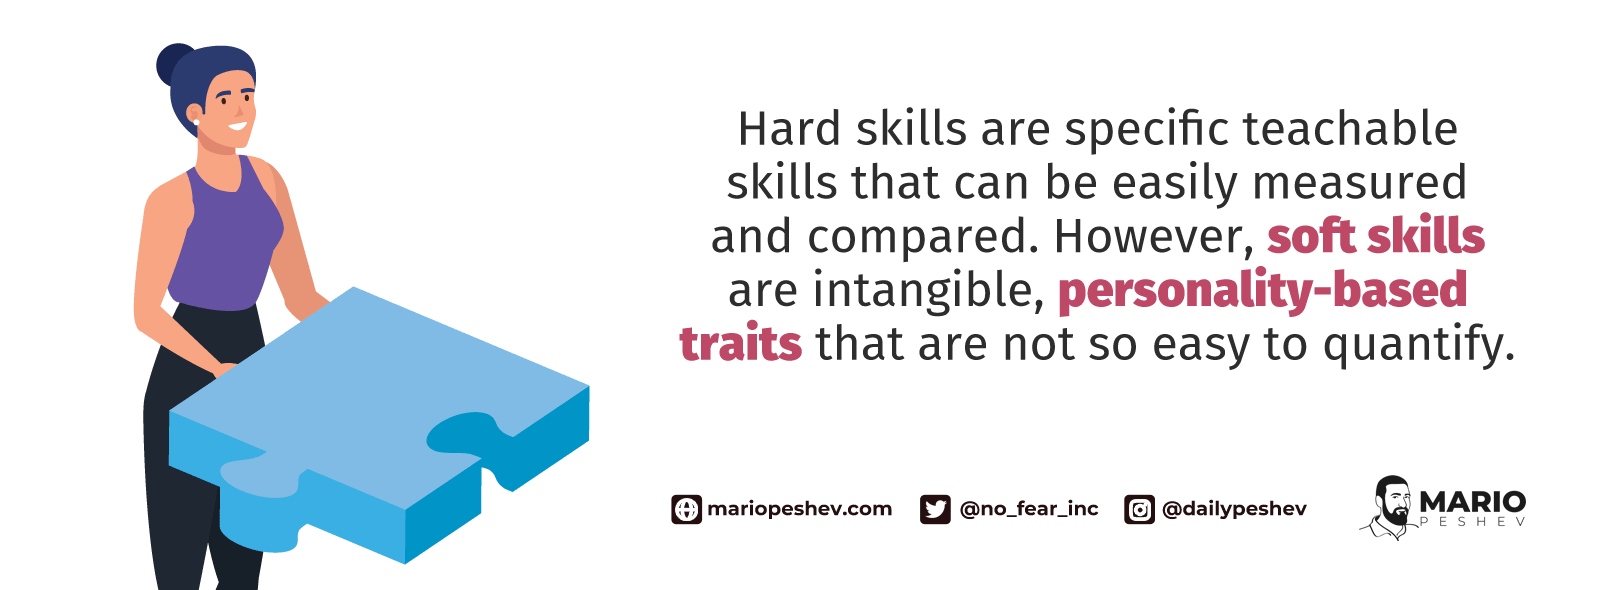 Hard skills are specific teachable skills that can be easily measured and compared. However, soft skills are intangible, personality-based traits that are not so easy to quantify.